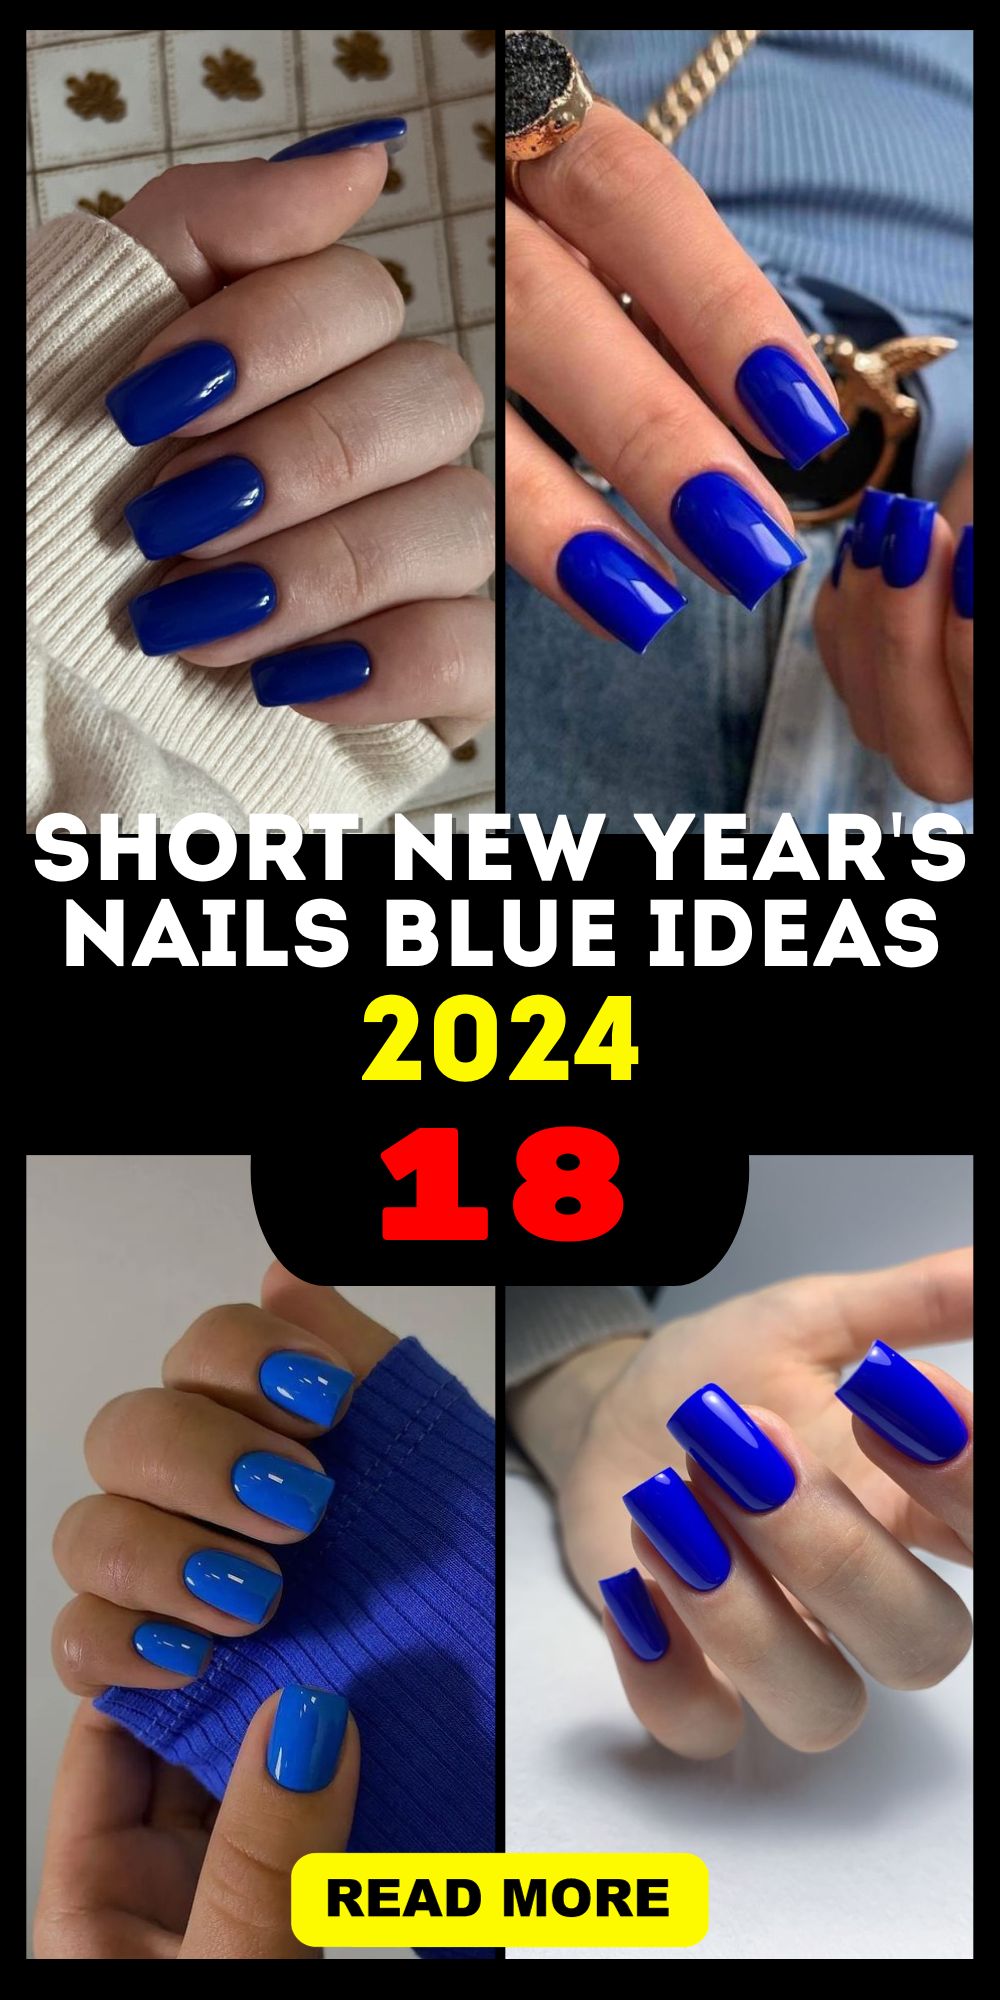 2024 Trends for Short New Year's Nails: Navy, Sparkle, and More!